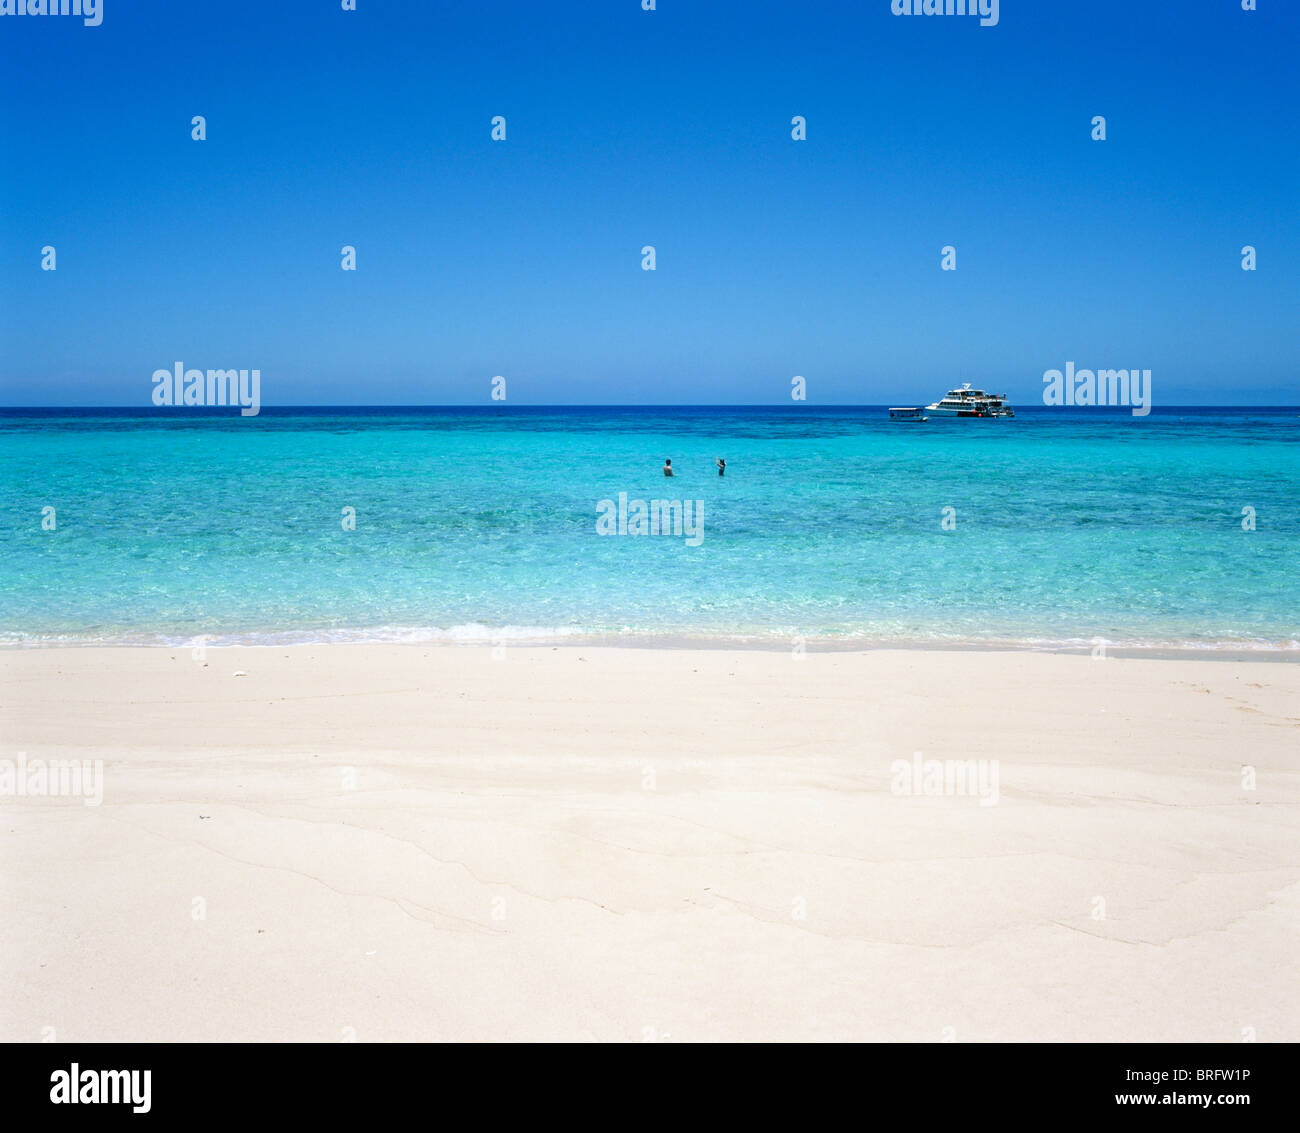 Sandbank with excursion boat in distance, Great Barrier Reef, Cairns, North Queensland, Australia Stock Photo